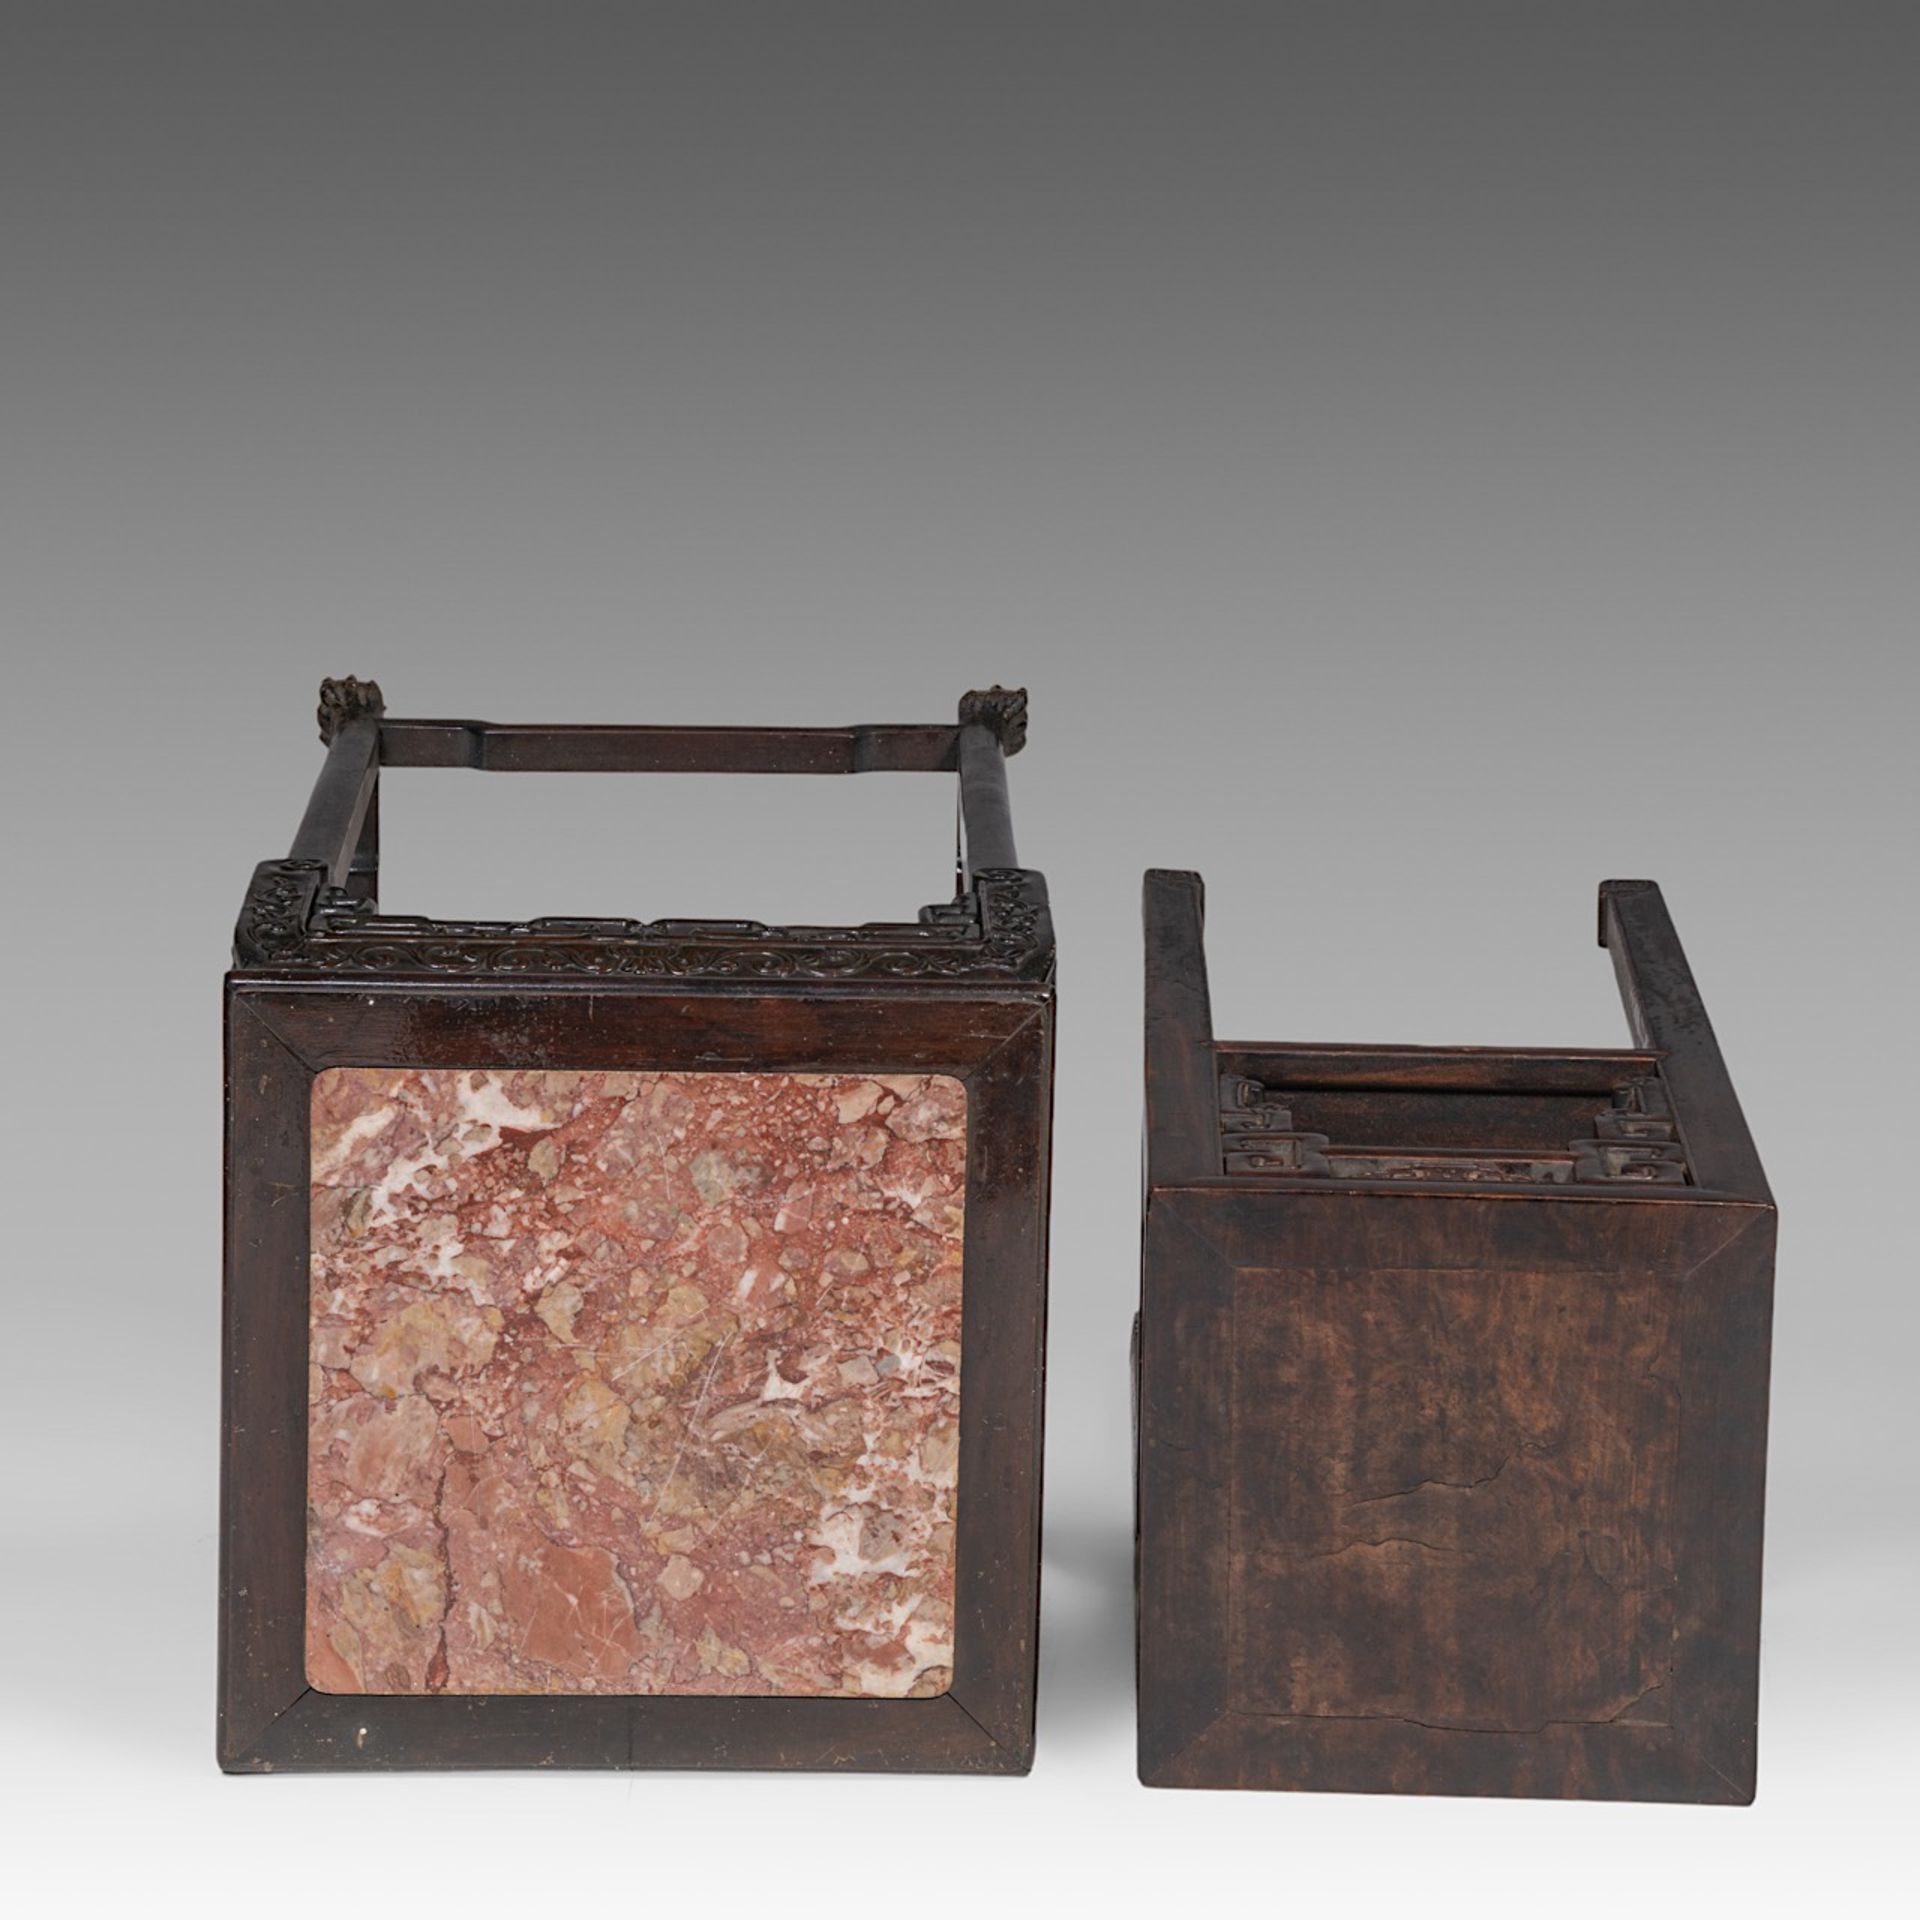 Two South-Chinese carved hardwood bases, one with a marble top, late Qing, largest H 82 - 48 x 48 cm - Bild 6 aus 7